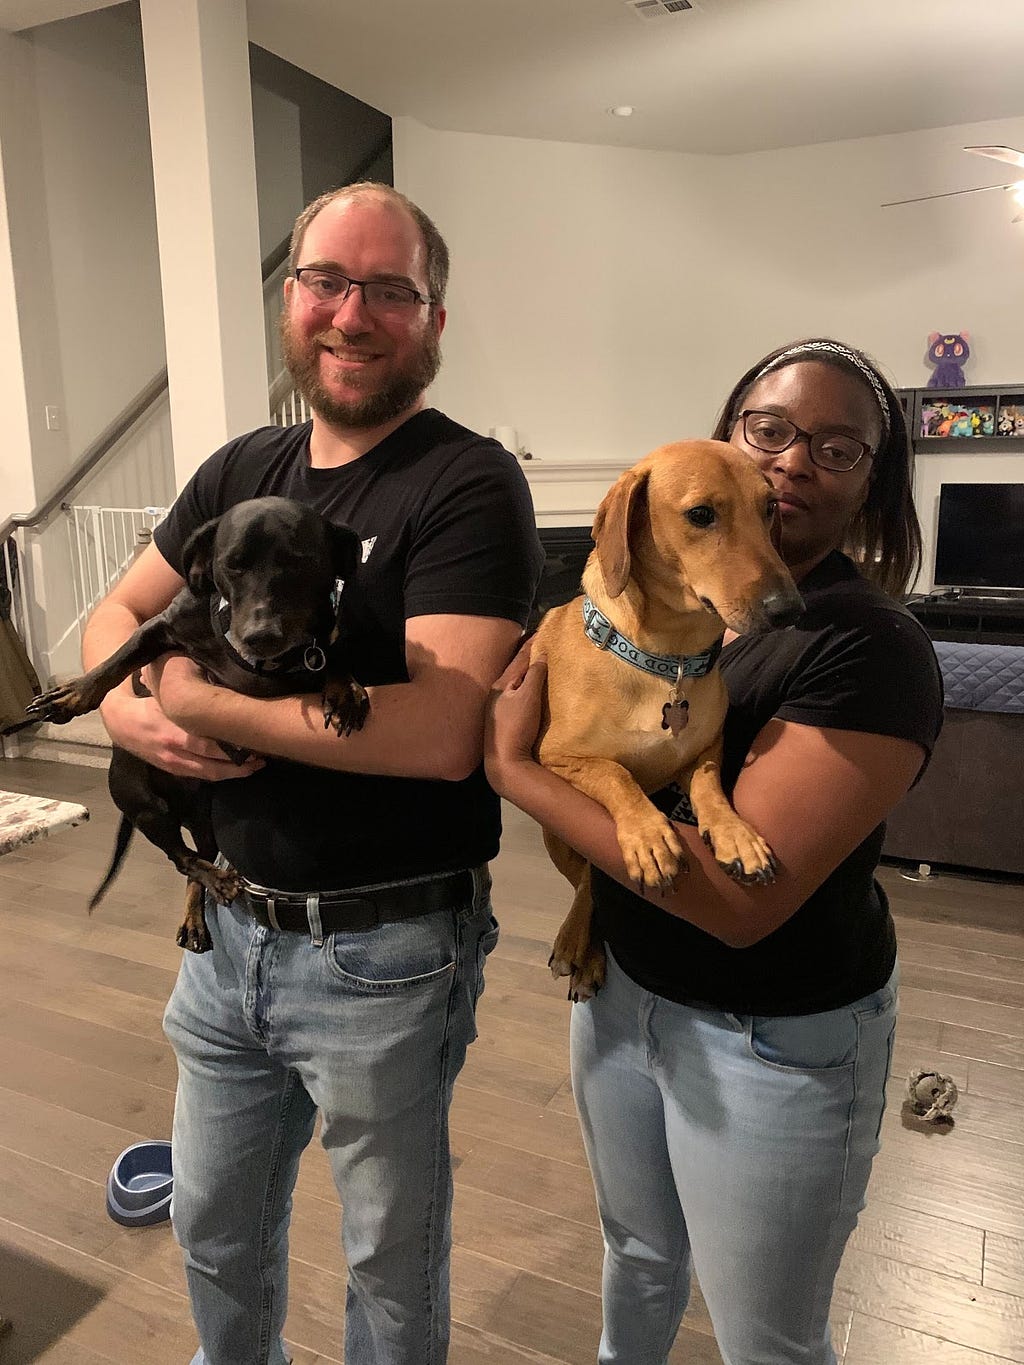 Jessica and her husband standing in their home, each holding an adorable dog!